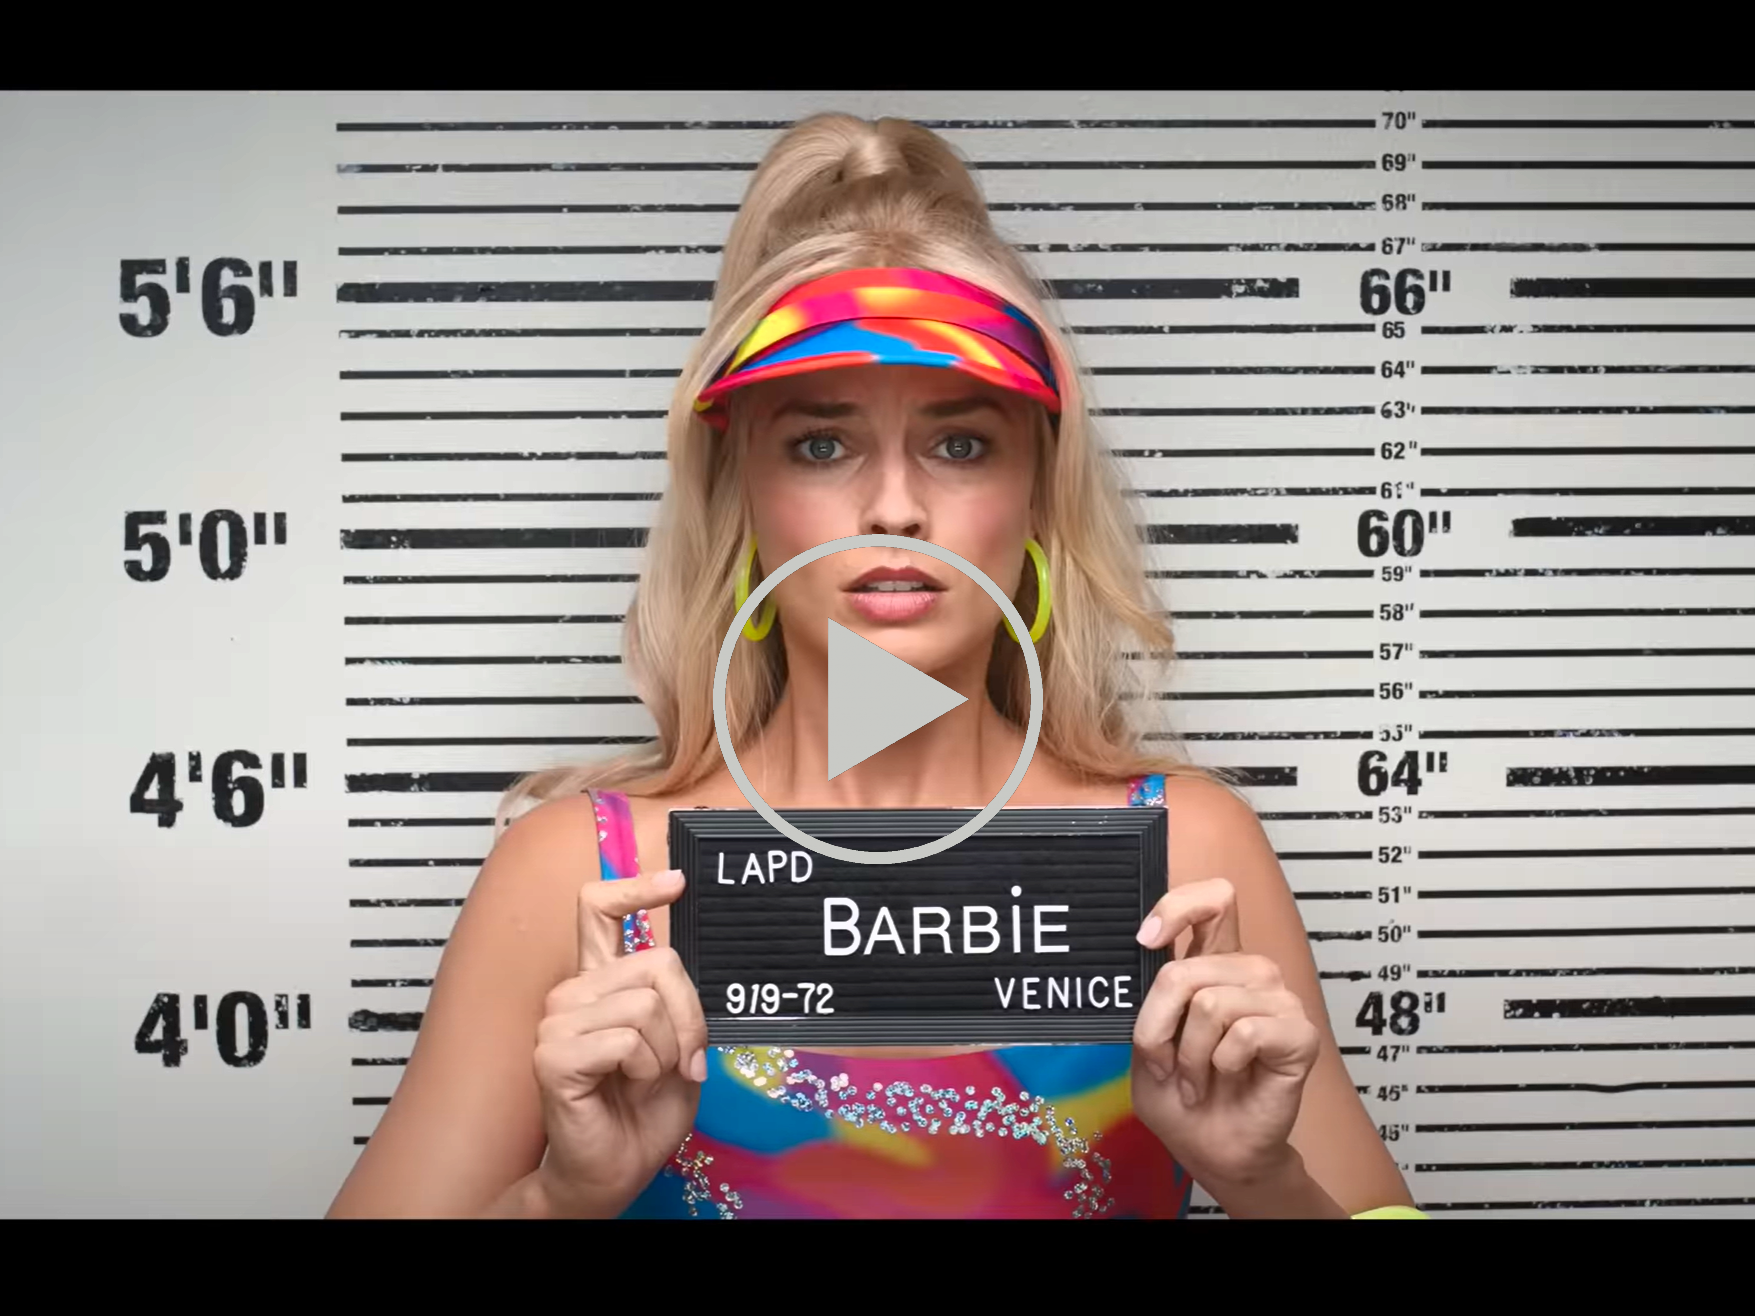 Free streams to watch Barbie spread online amid security warnings The Independent